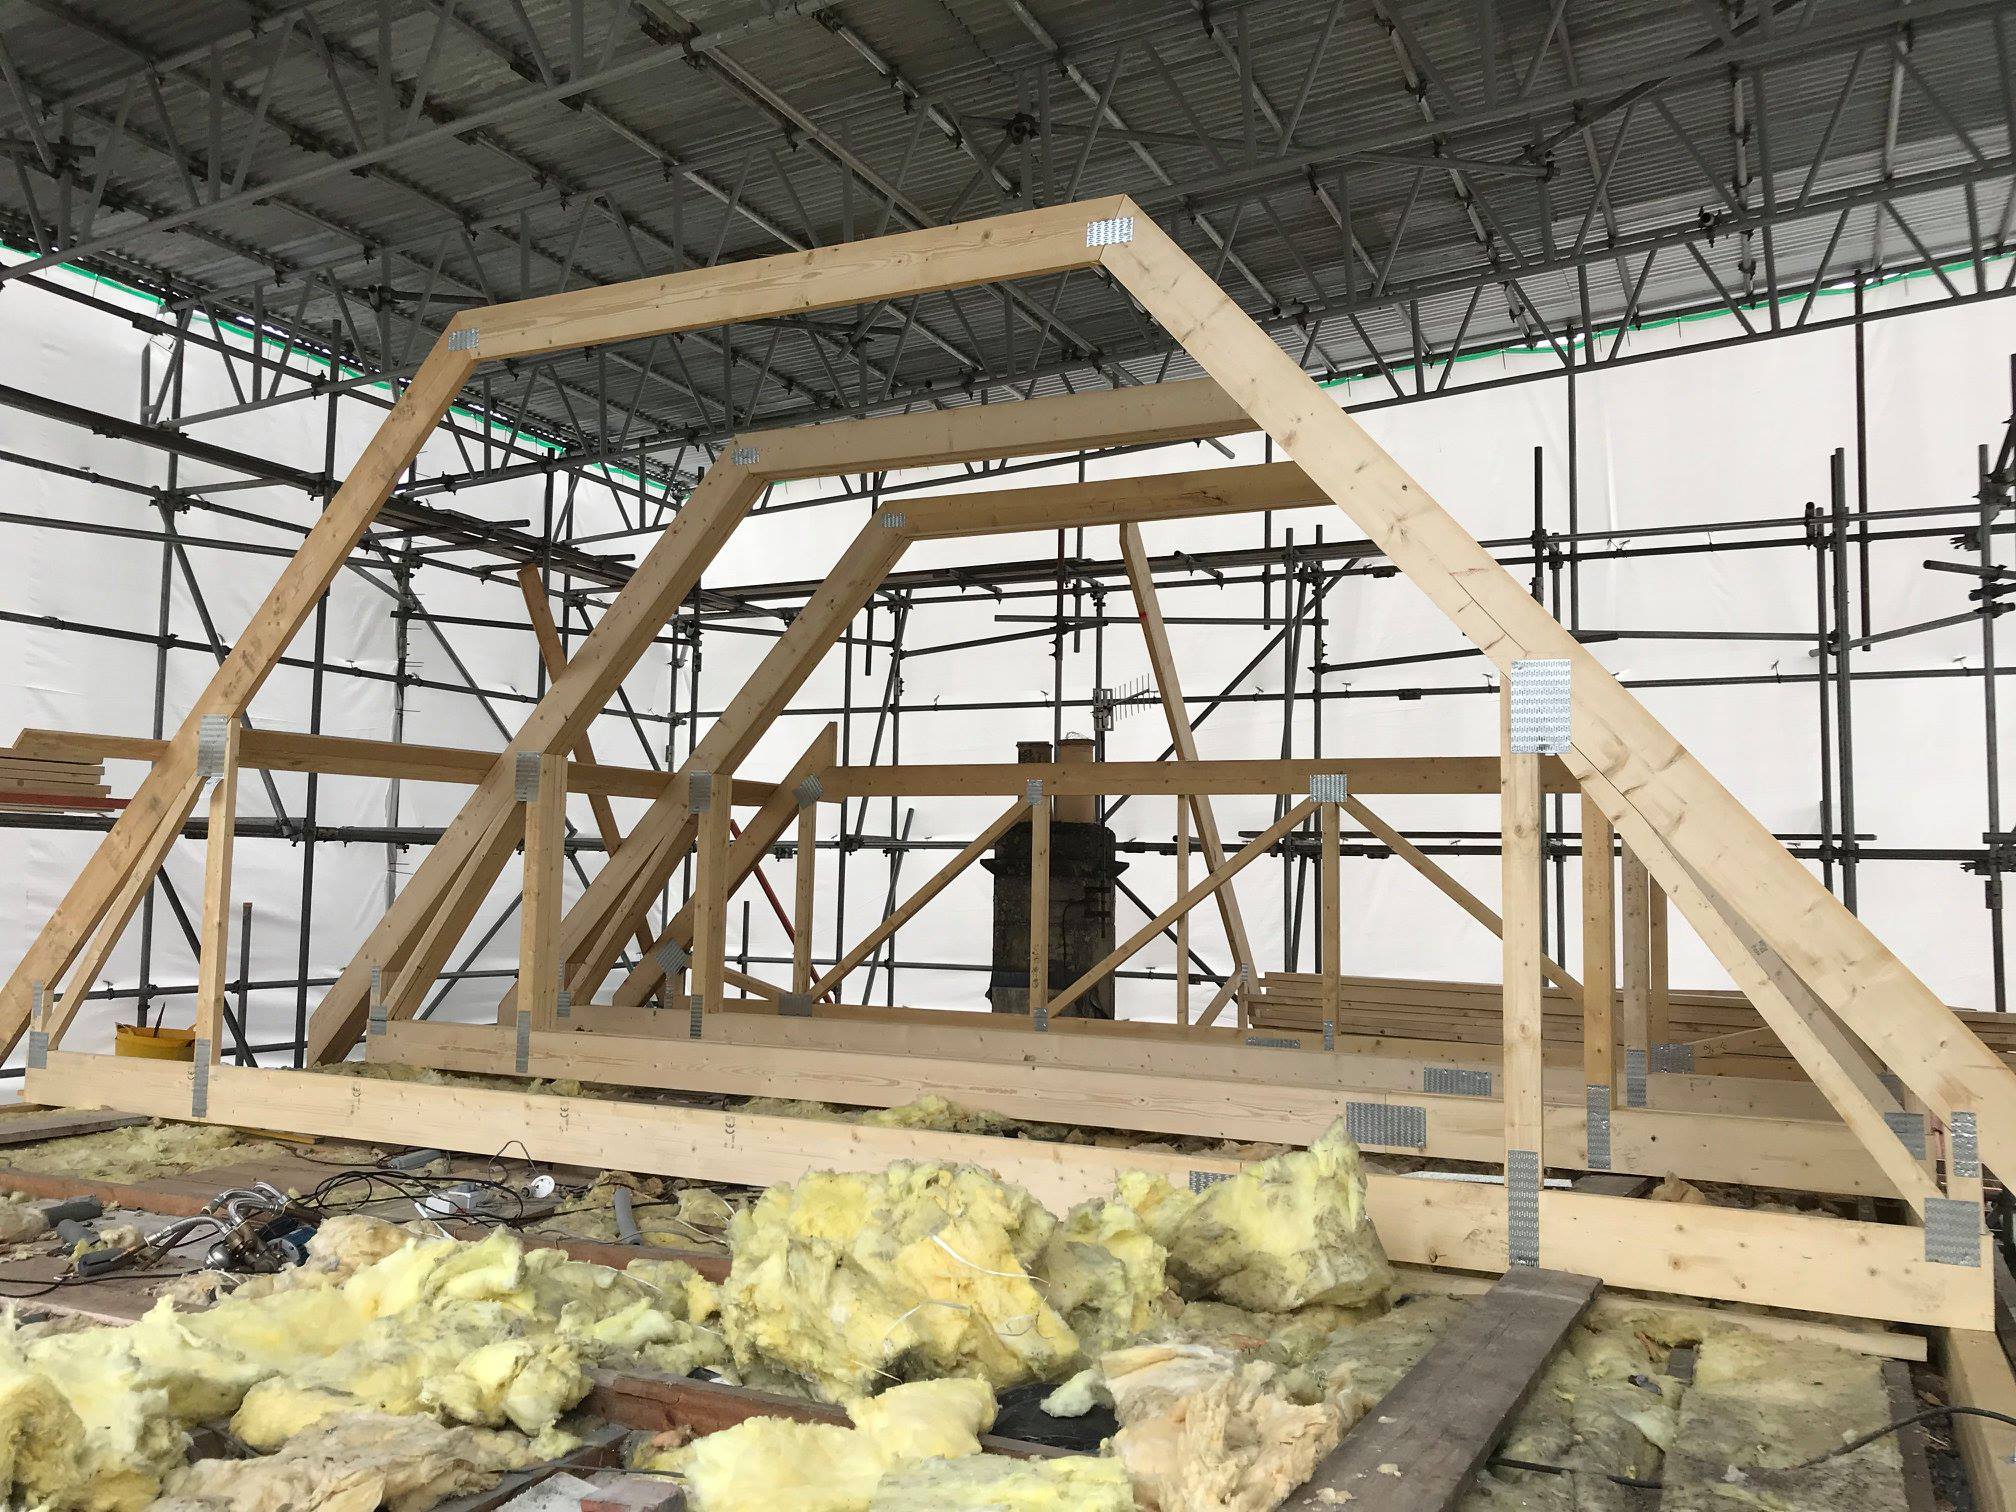 roof trusses